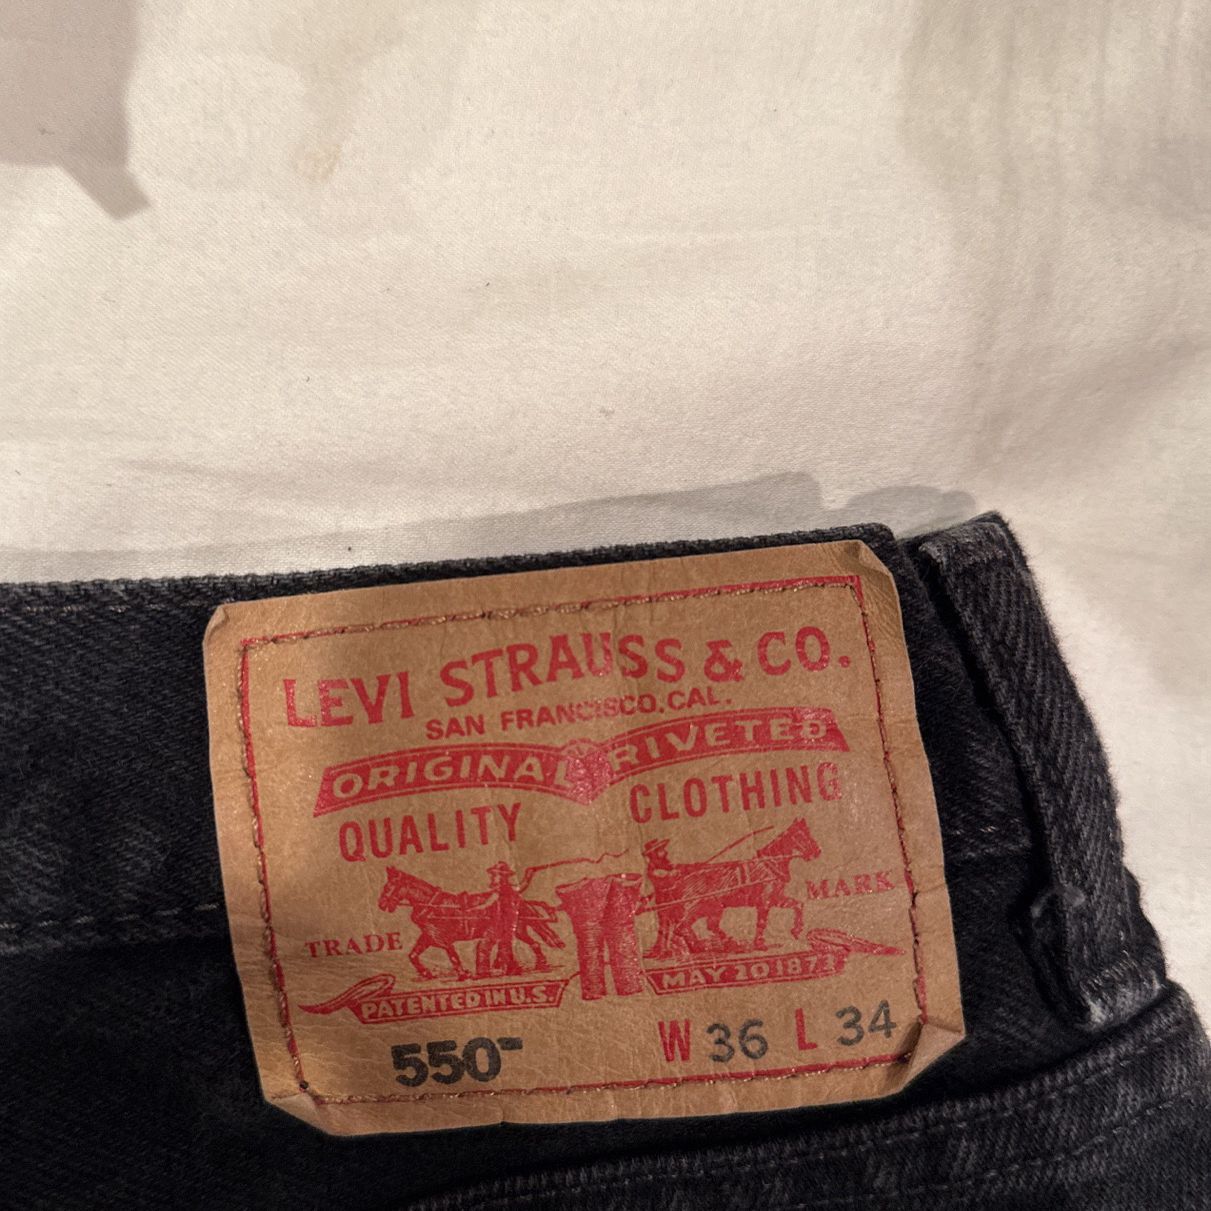 Levi Strauss and Co men’s jeans